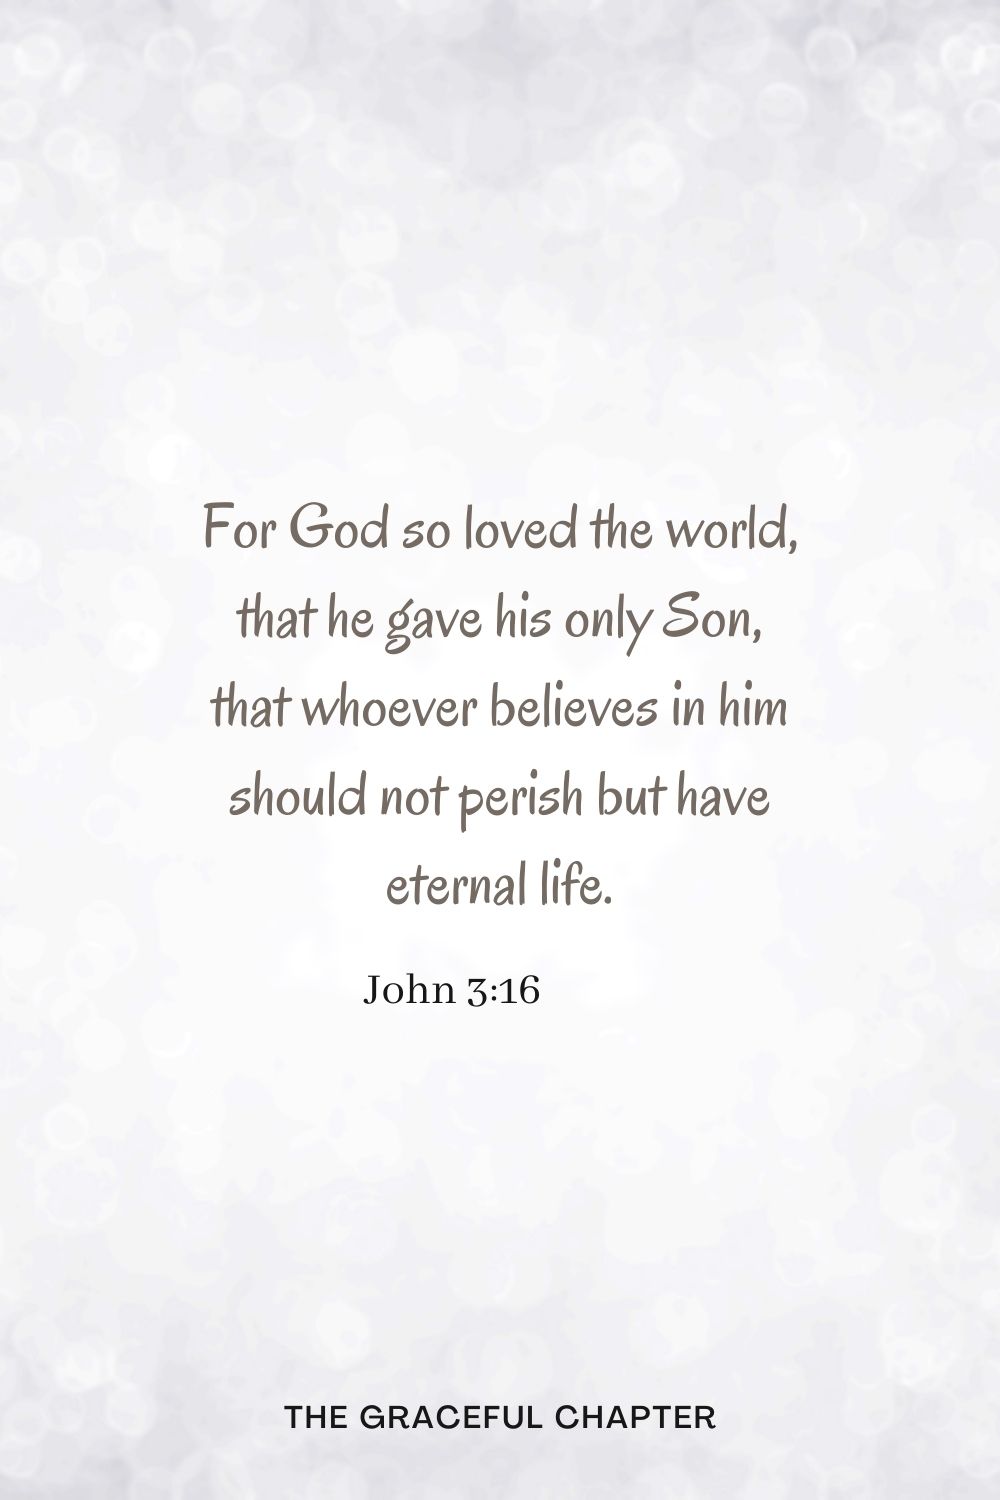 For God so loved the world, that he gave his only Son, that whoever believes in him should not perish but have eternal life. John 3:16